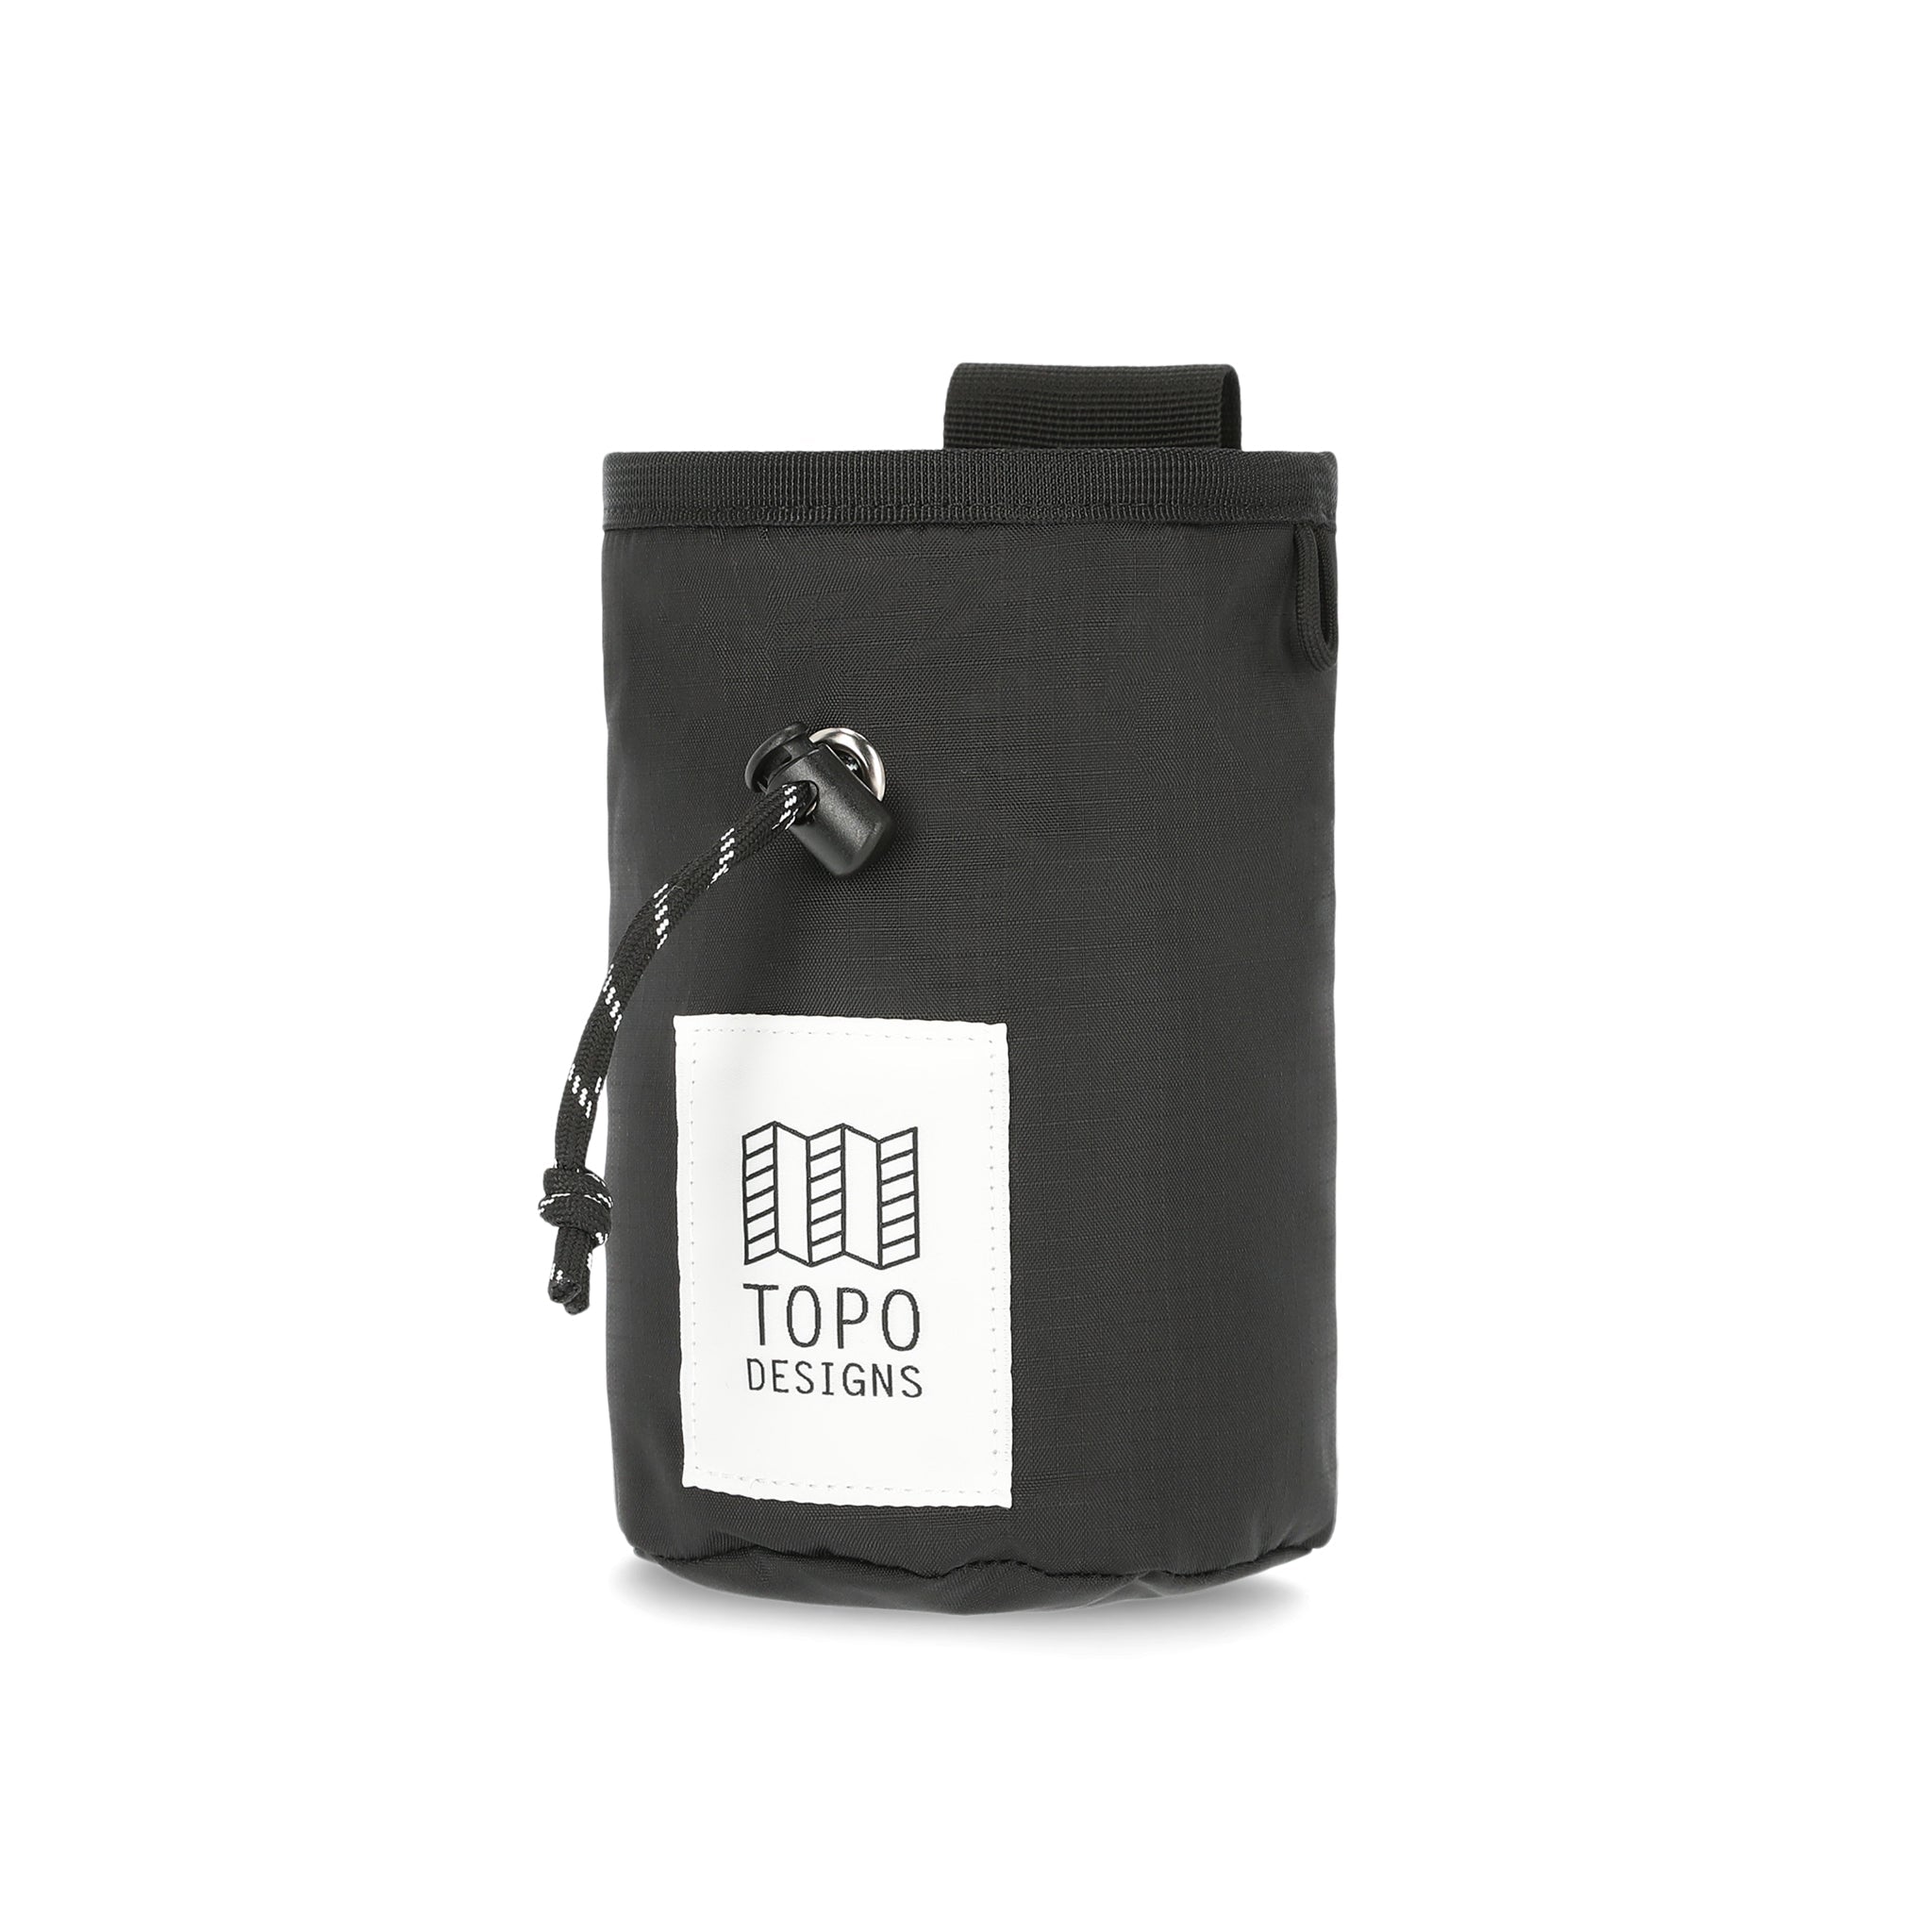 Topo Designs Mountain Chalk Bag for rock climbing and bouldering in lightweight recycled "Black" nylon.